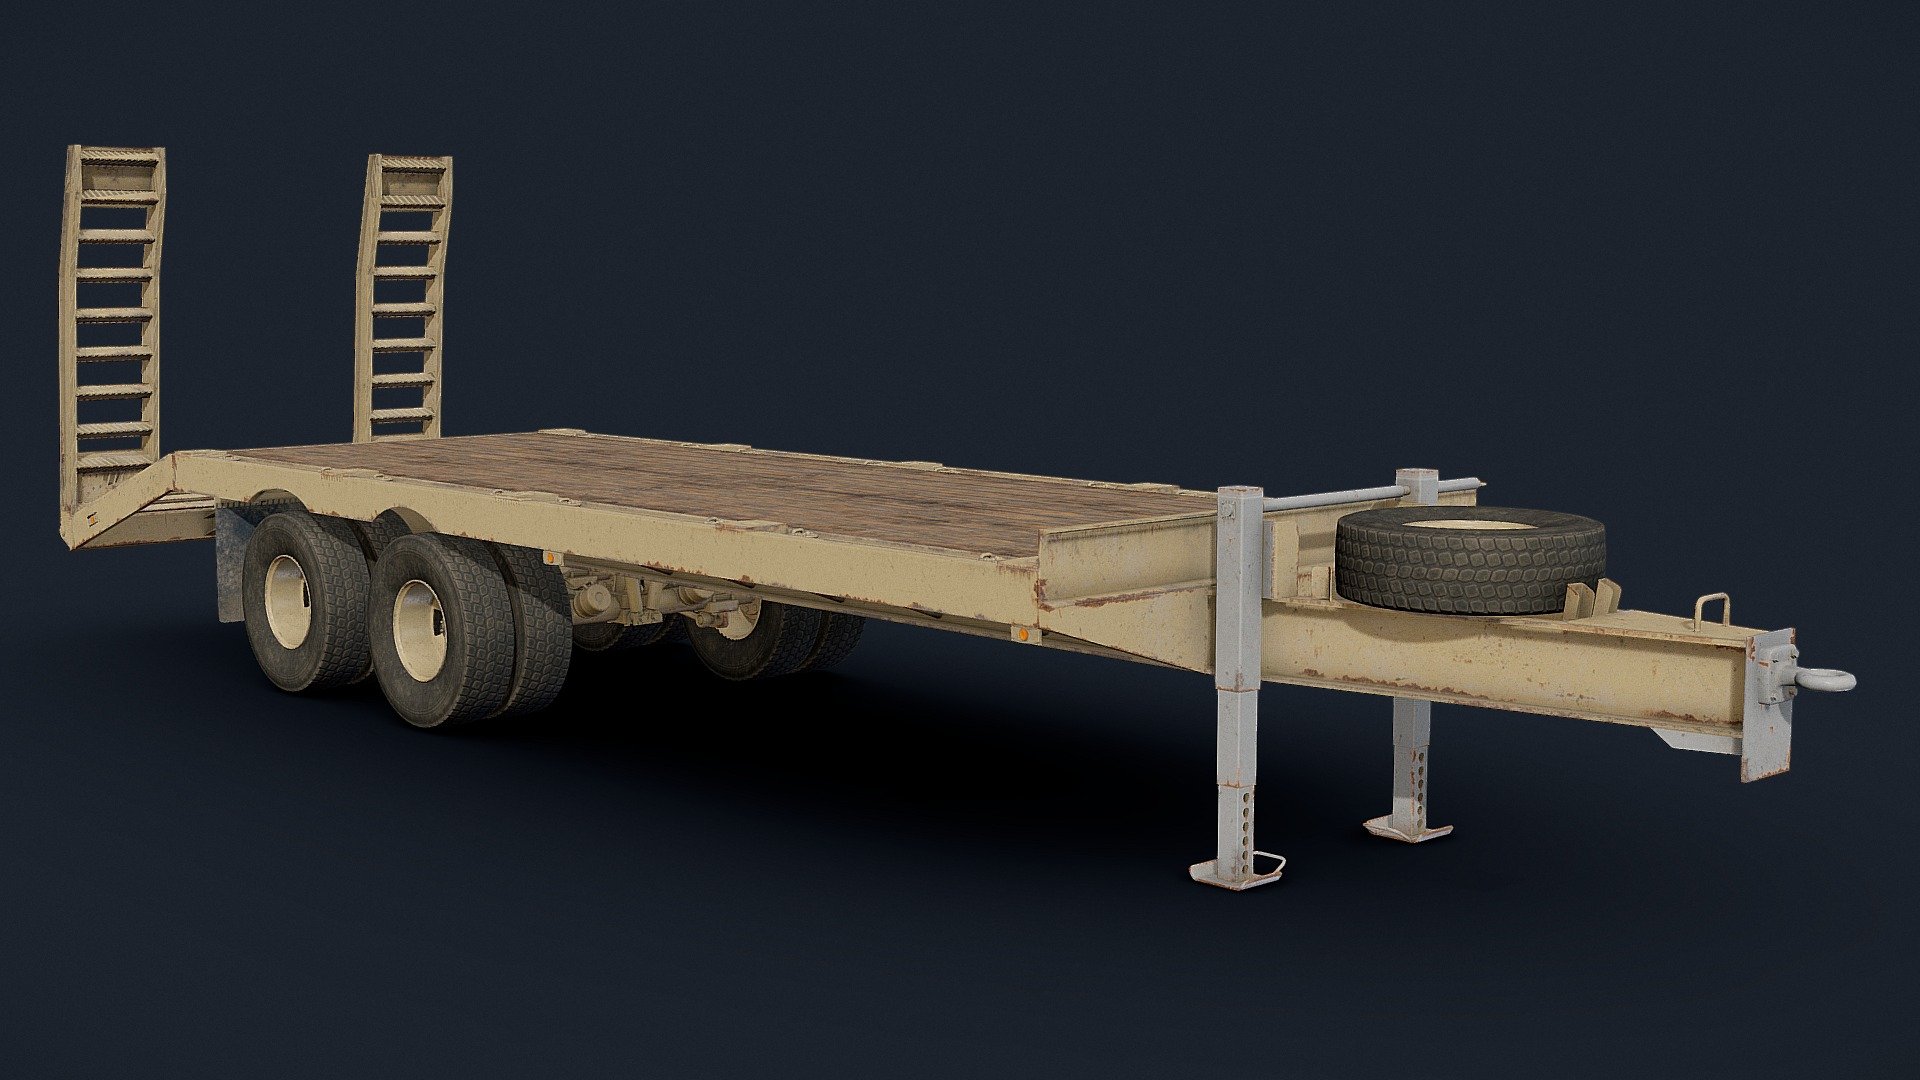 A slightly modified version of the original M322 trailer. Suitable for vehicle transportation, as well as cargo and container transportation.
Game-ready model. Made in Blender, RizomUV used for UV progress and textured in Substance 3D Painter. Fully rigged 3d model